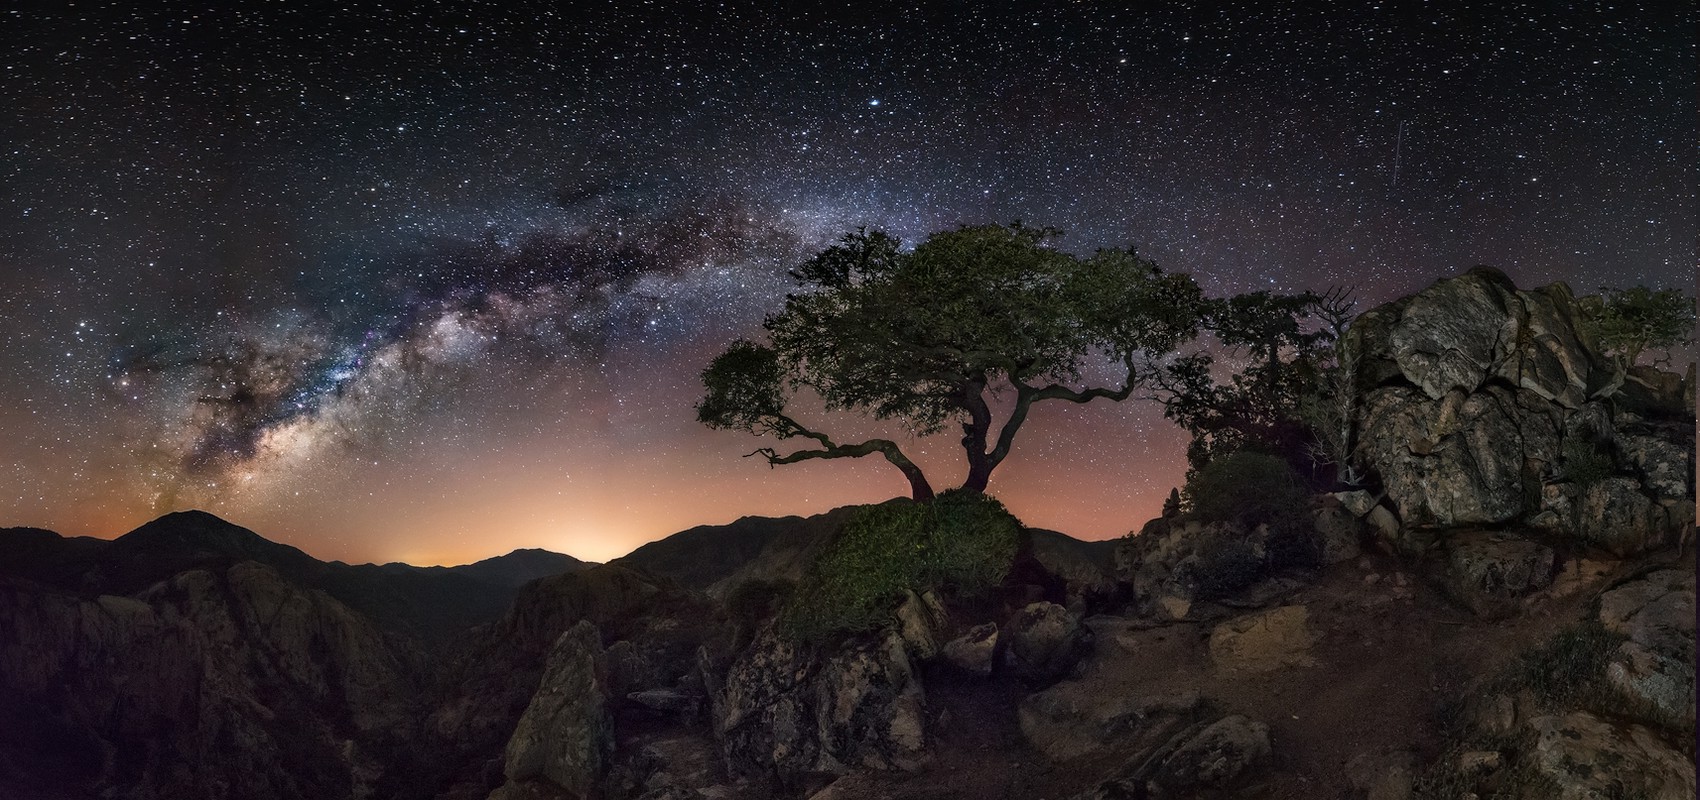 nature, Landscape, Starry Night, Milky Way, Trees, Mountain, Lights, Long Exposure, Space, Rock Wallpaper